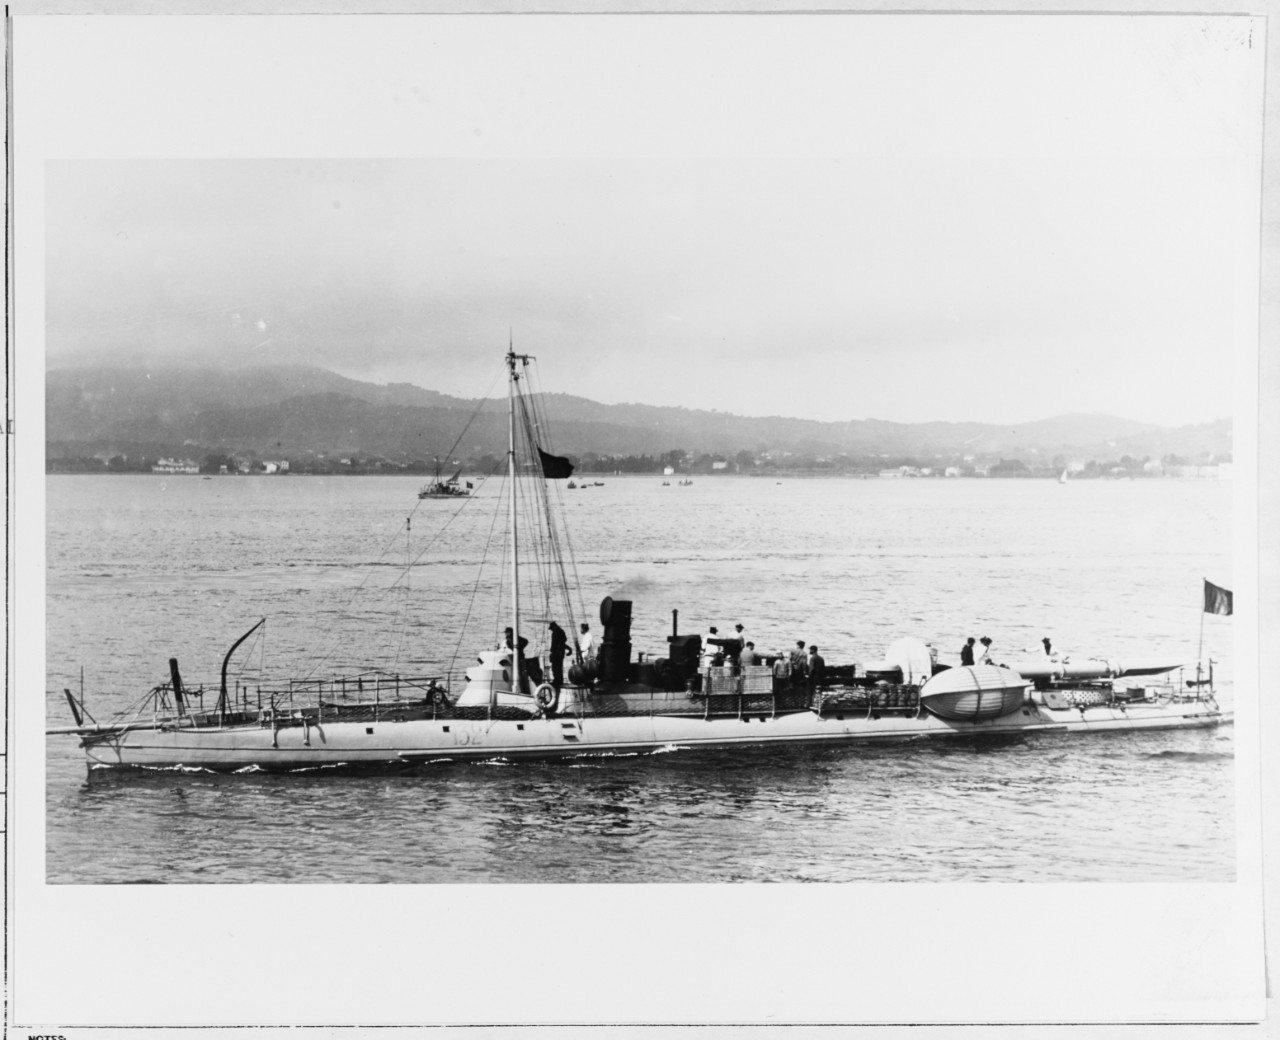 TORPILLEUR 132 (French torpedo boat, 1890)